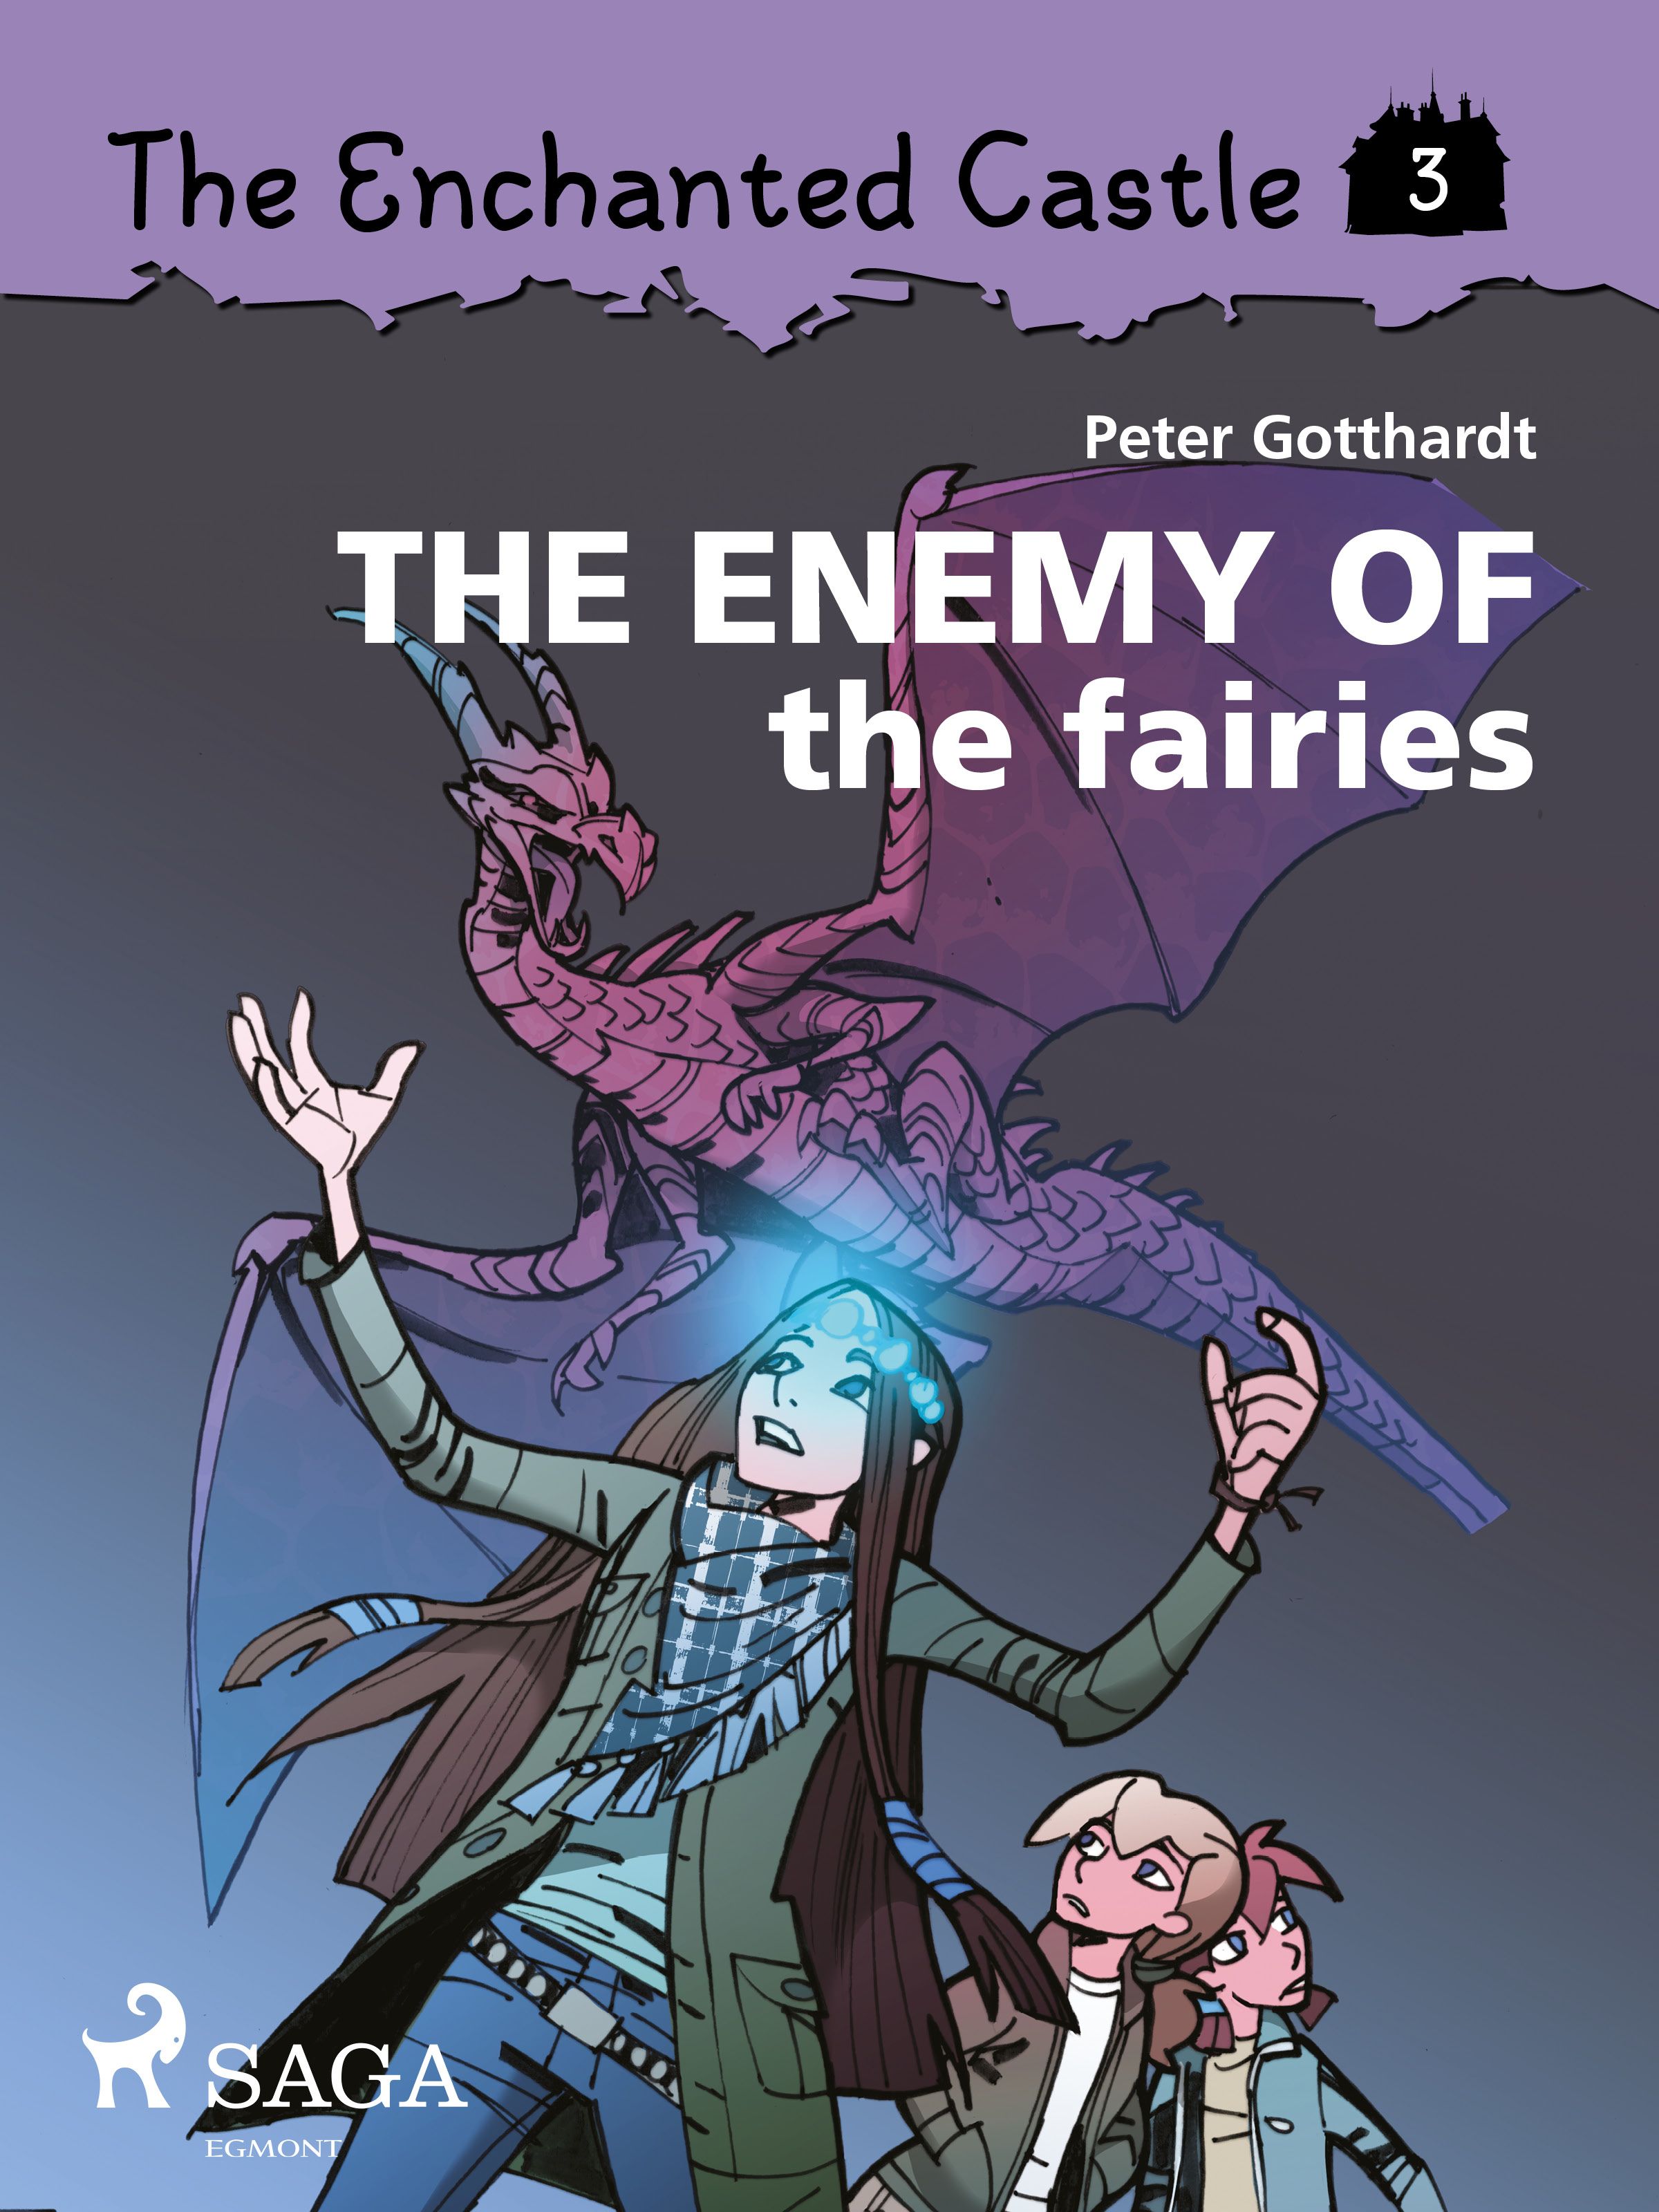 The Enchanted Castle 3 - The Enemy of the Fairies, eBook by Peter Gotthardt